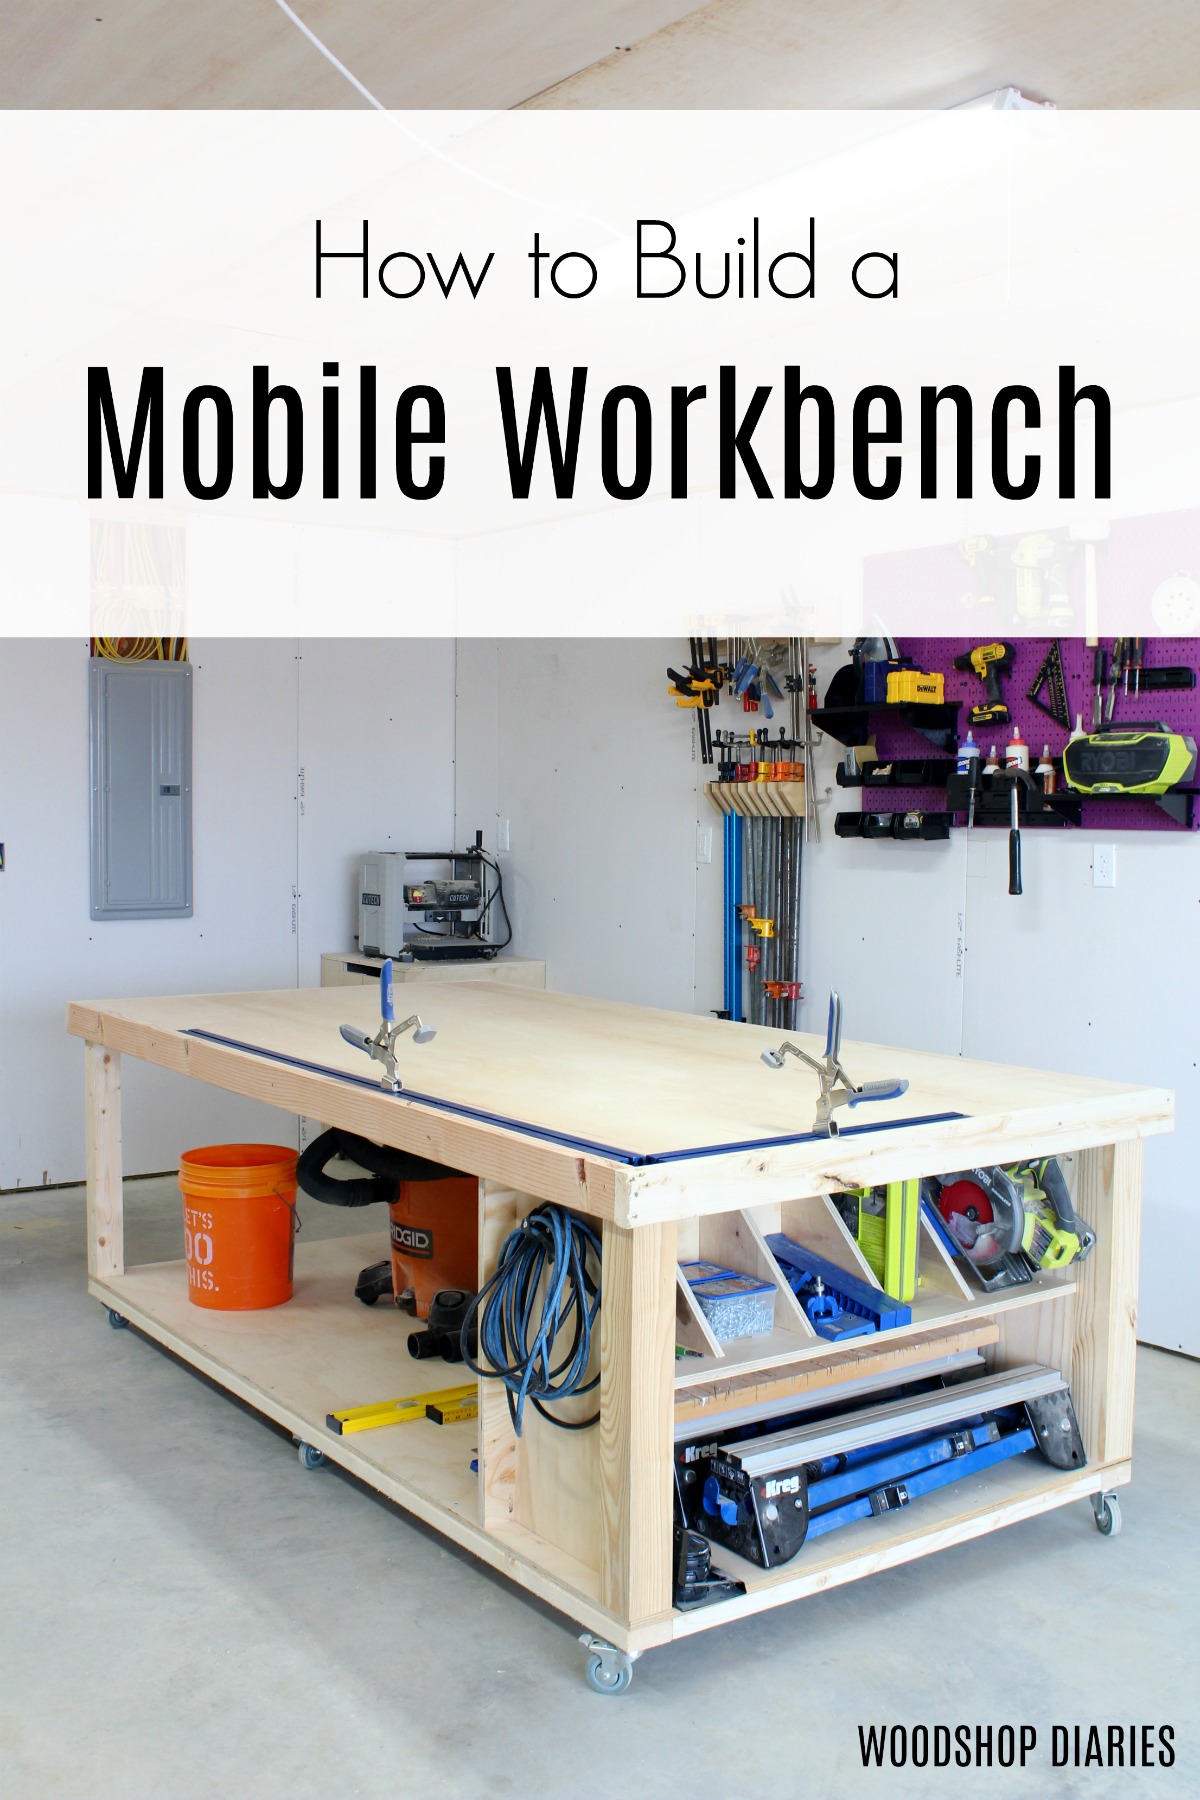 Pinterest image showing DIY mobile workbench in workshop with text "how to build a mobile workbench"